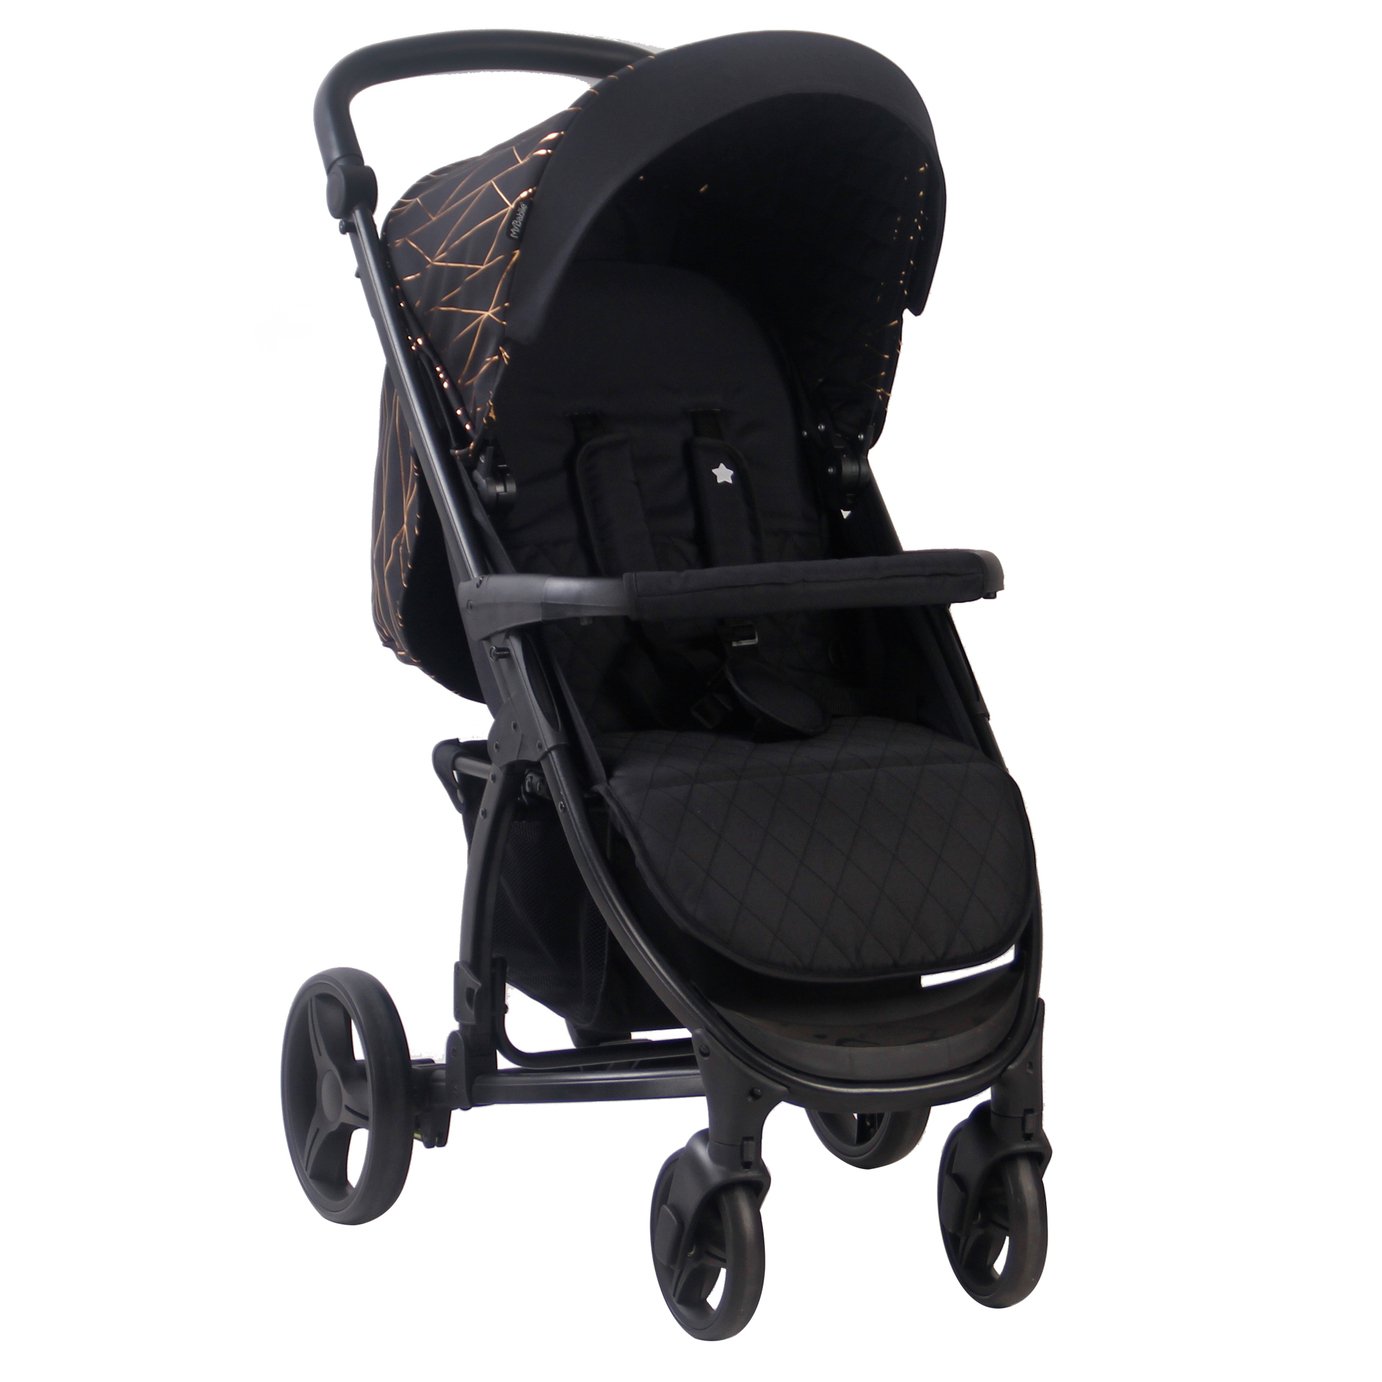 My Babiie MB200+ Travel System Review